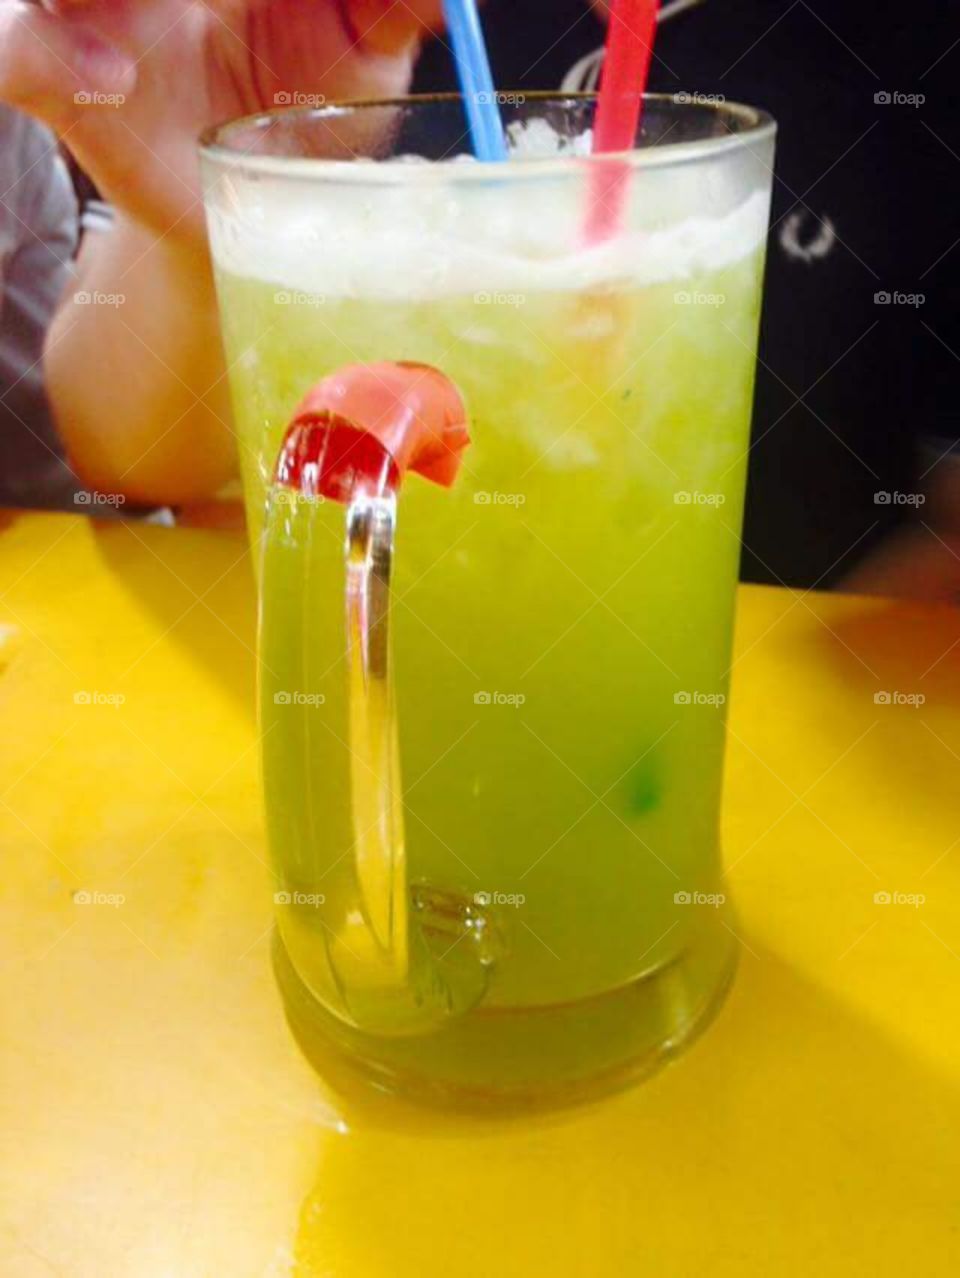 first time to try pure sugarcane drink
when in Singapore